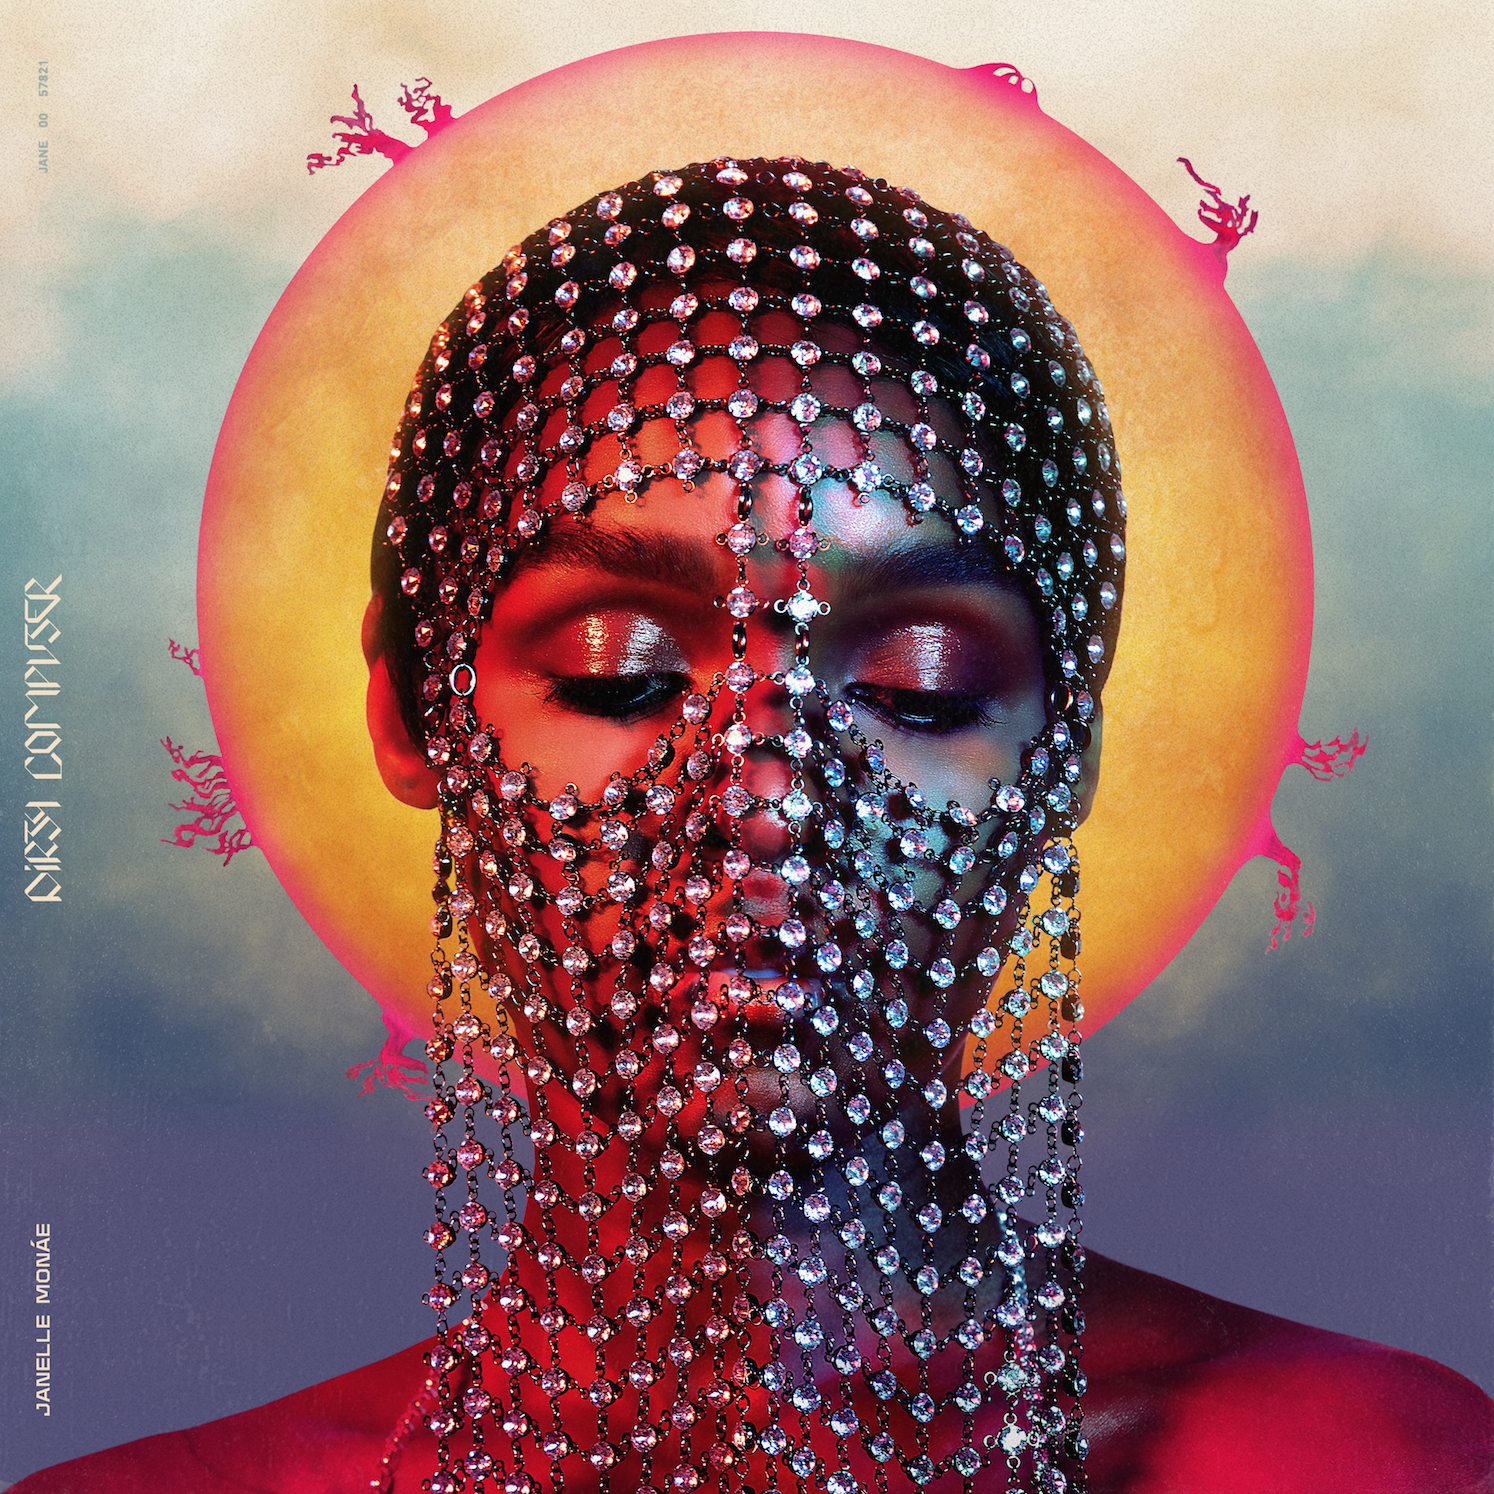 Janelle Monáe Details New Album <i></noscript>Dirty Computer</i>, Releases Videos For “Make Me Feel” and “Django Jane”” title=”Screen-Shot-2018-02-22-at-12.29.32-PM-1519320610″ data-original-id=”279595″ data-adjusted-id=”279595″ class=”sm_size_full_width sm_alignment_center ” data-image-source=”professional” />
</div>
</div>
</div>
</div>
</div>
</section>
<section data-particle_enable=